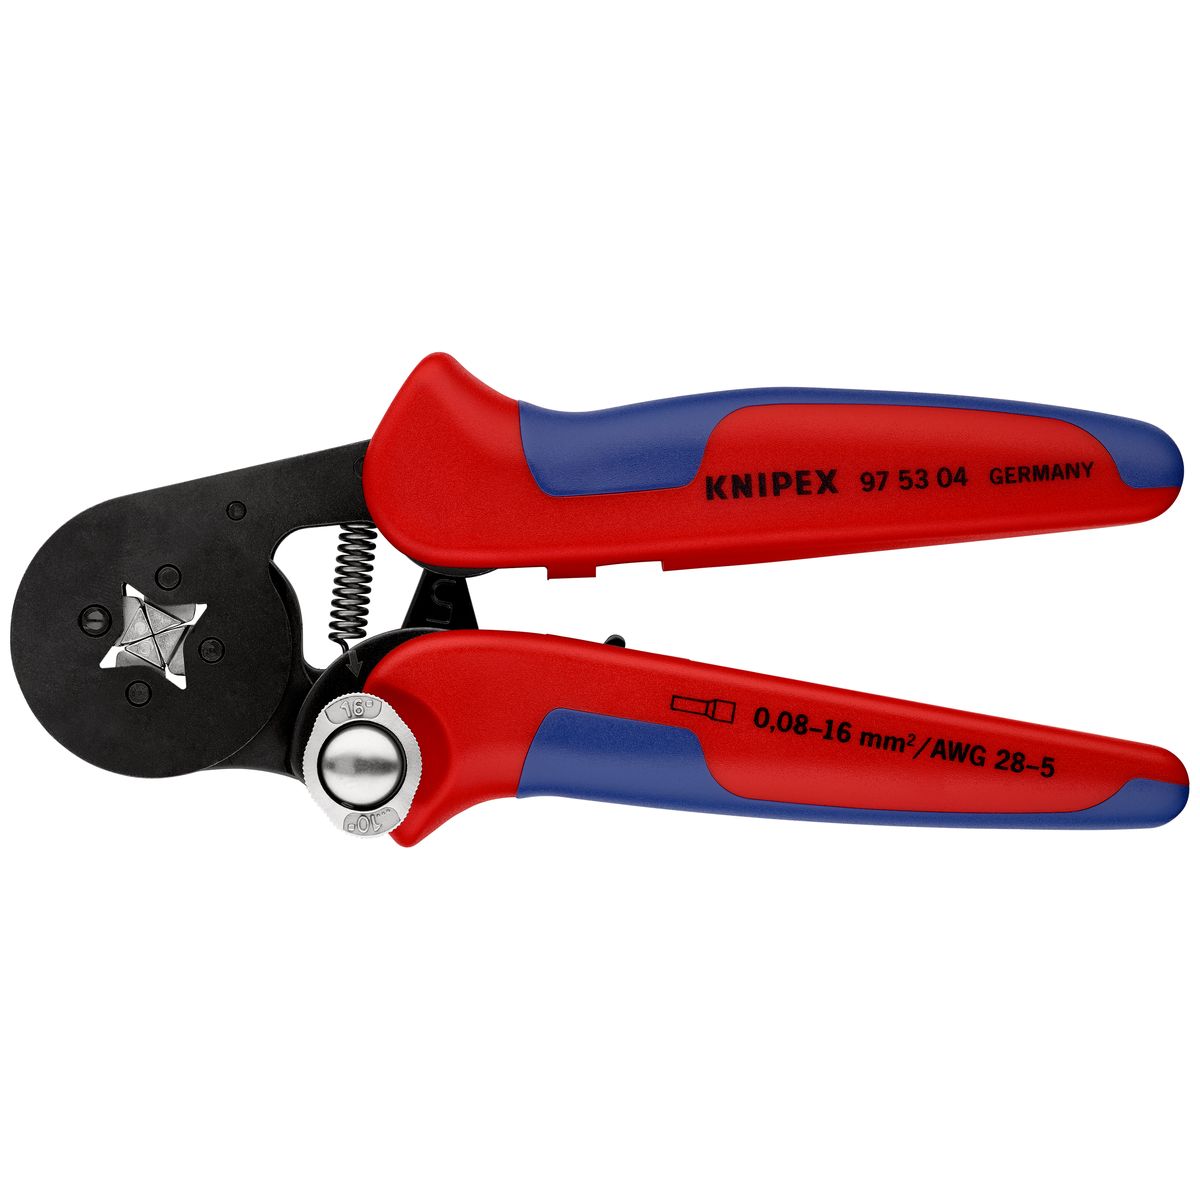 CRIMP PLIERS F. CABLE LINKS 975304 Knipex